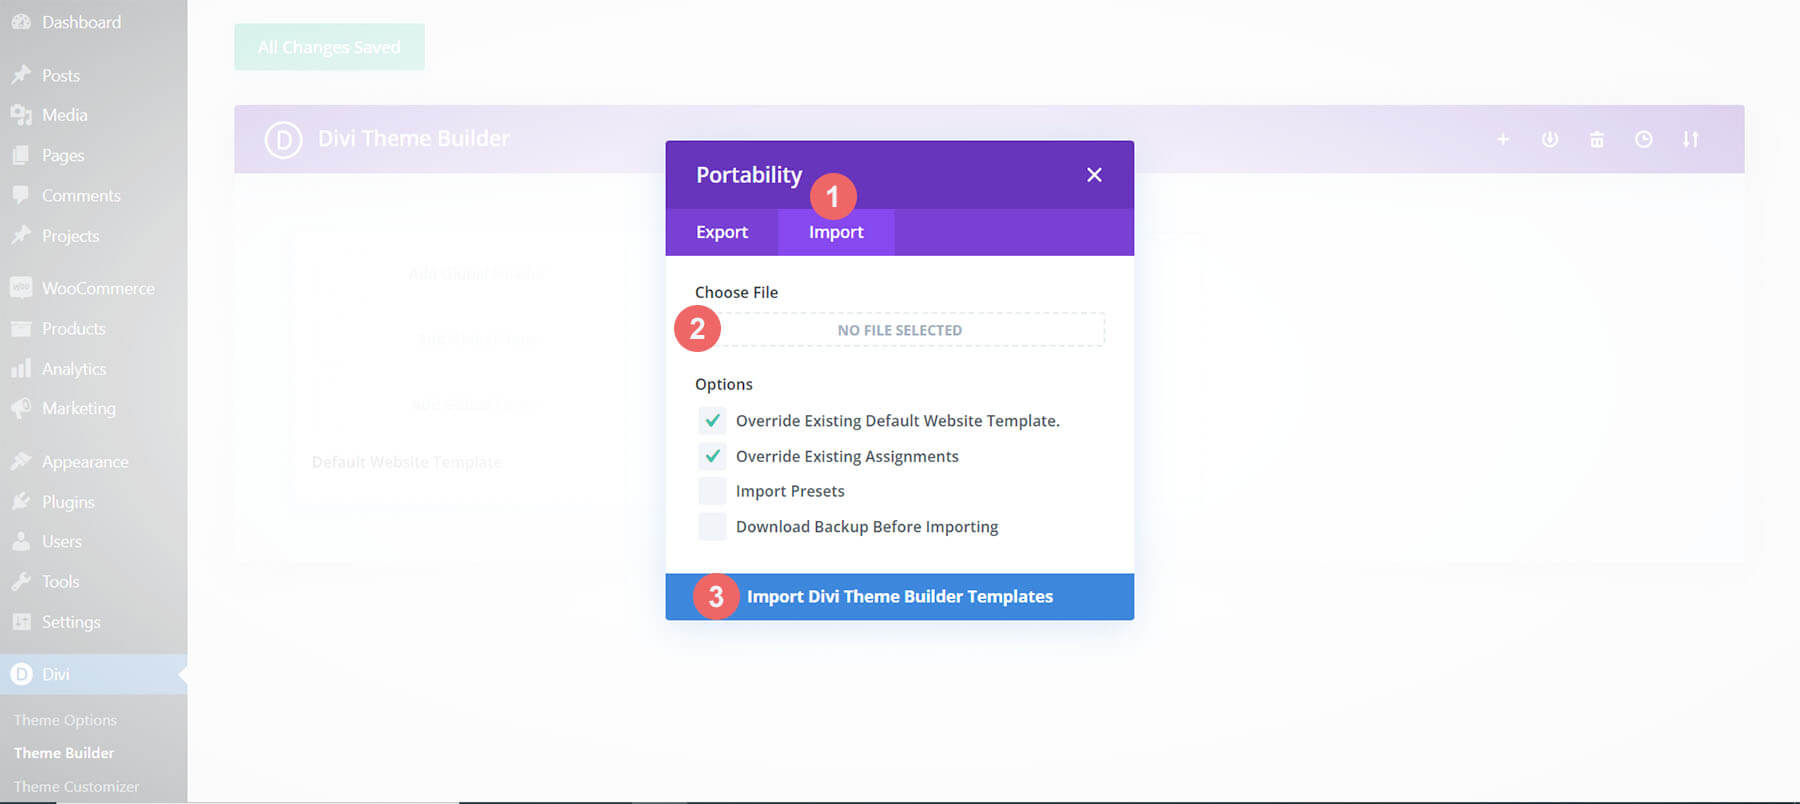 Finish importing the template into the Divi Theme Builder